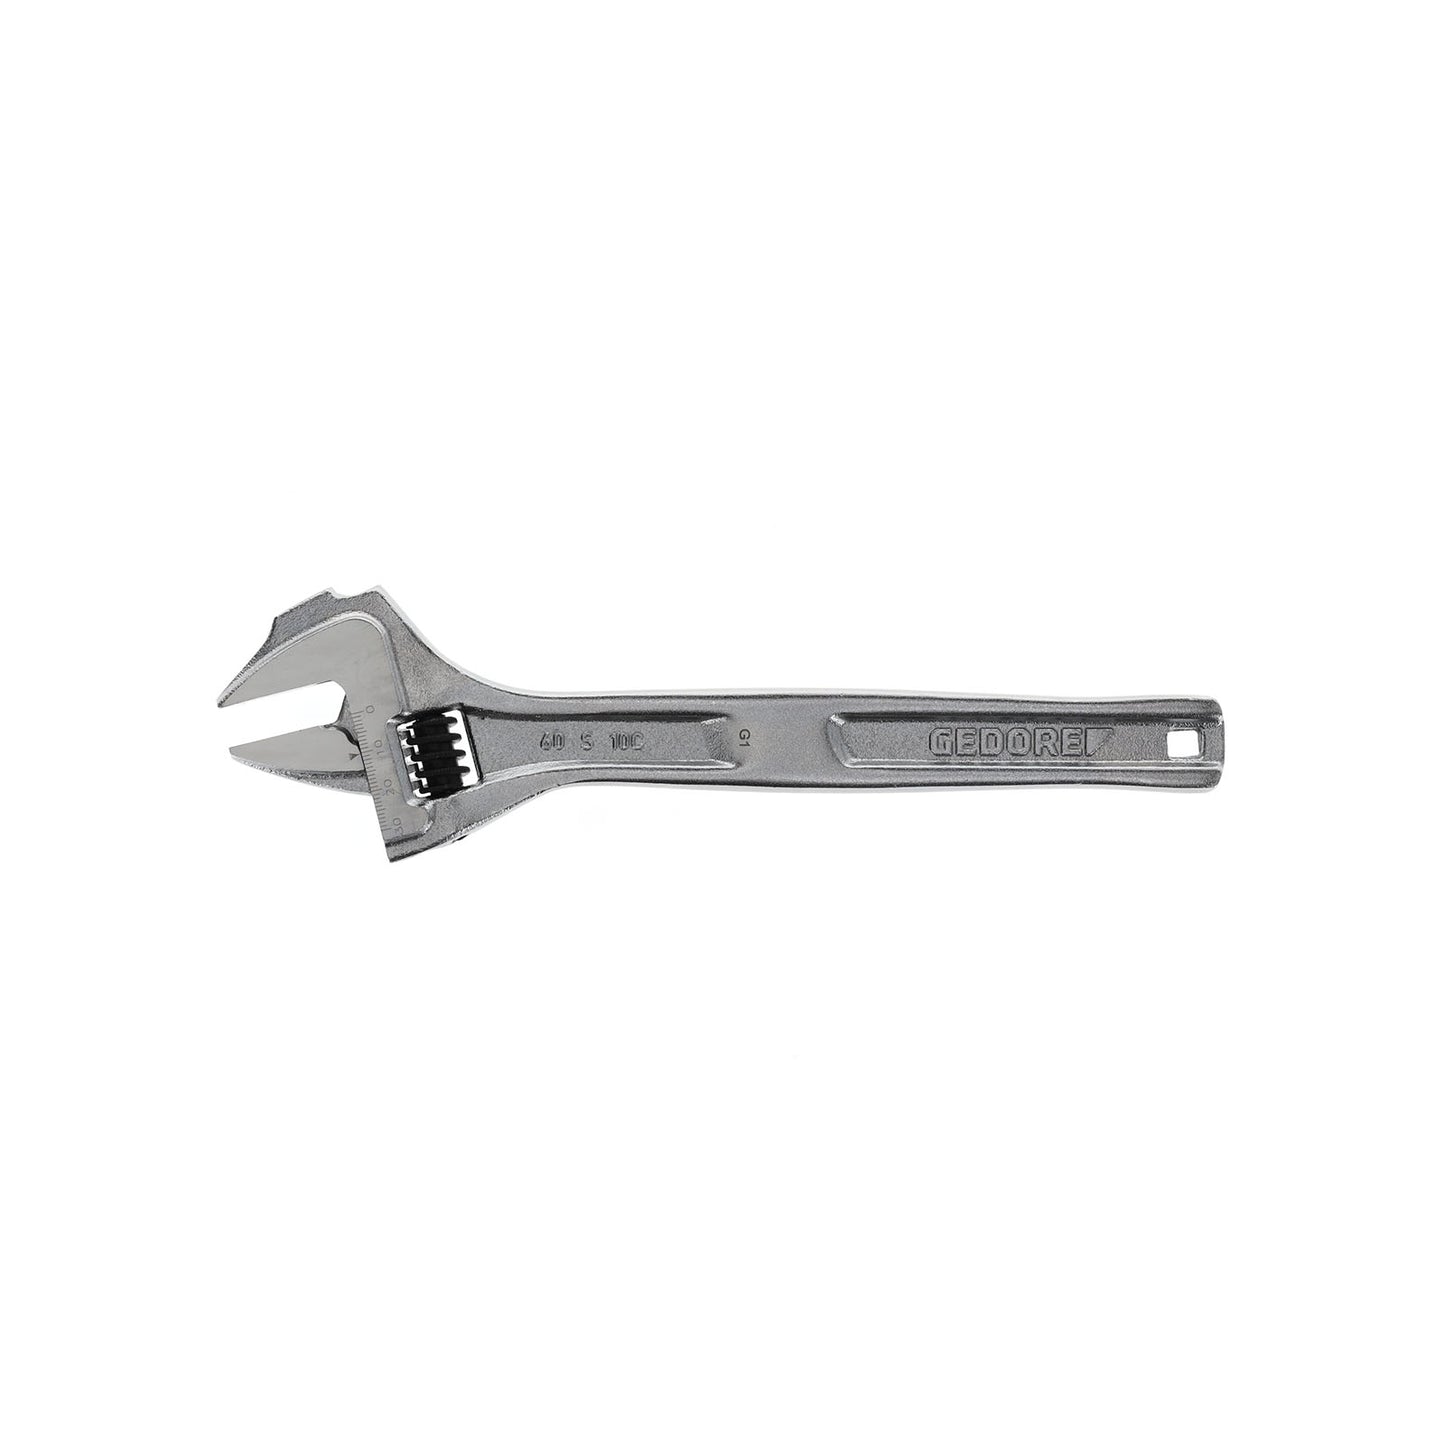 GEDORE 60 S 10 C - Chrome Adjustable Wrench, 10" (2170973)